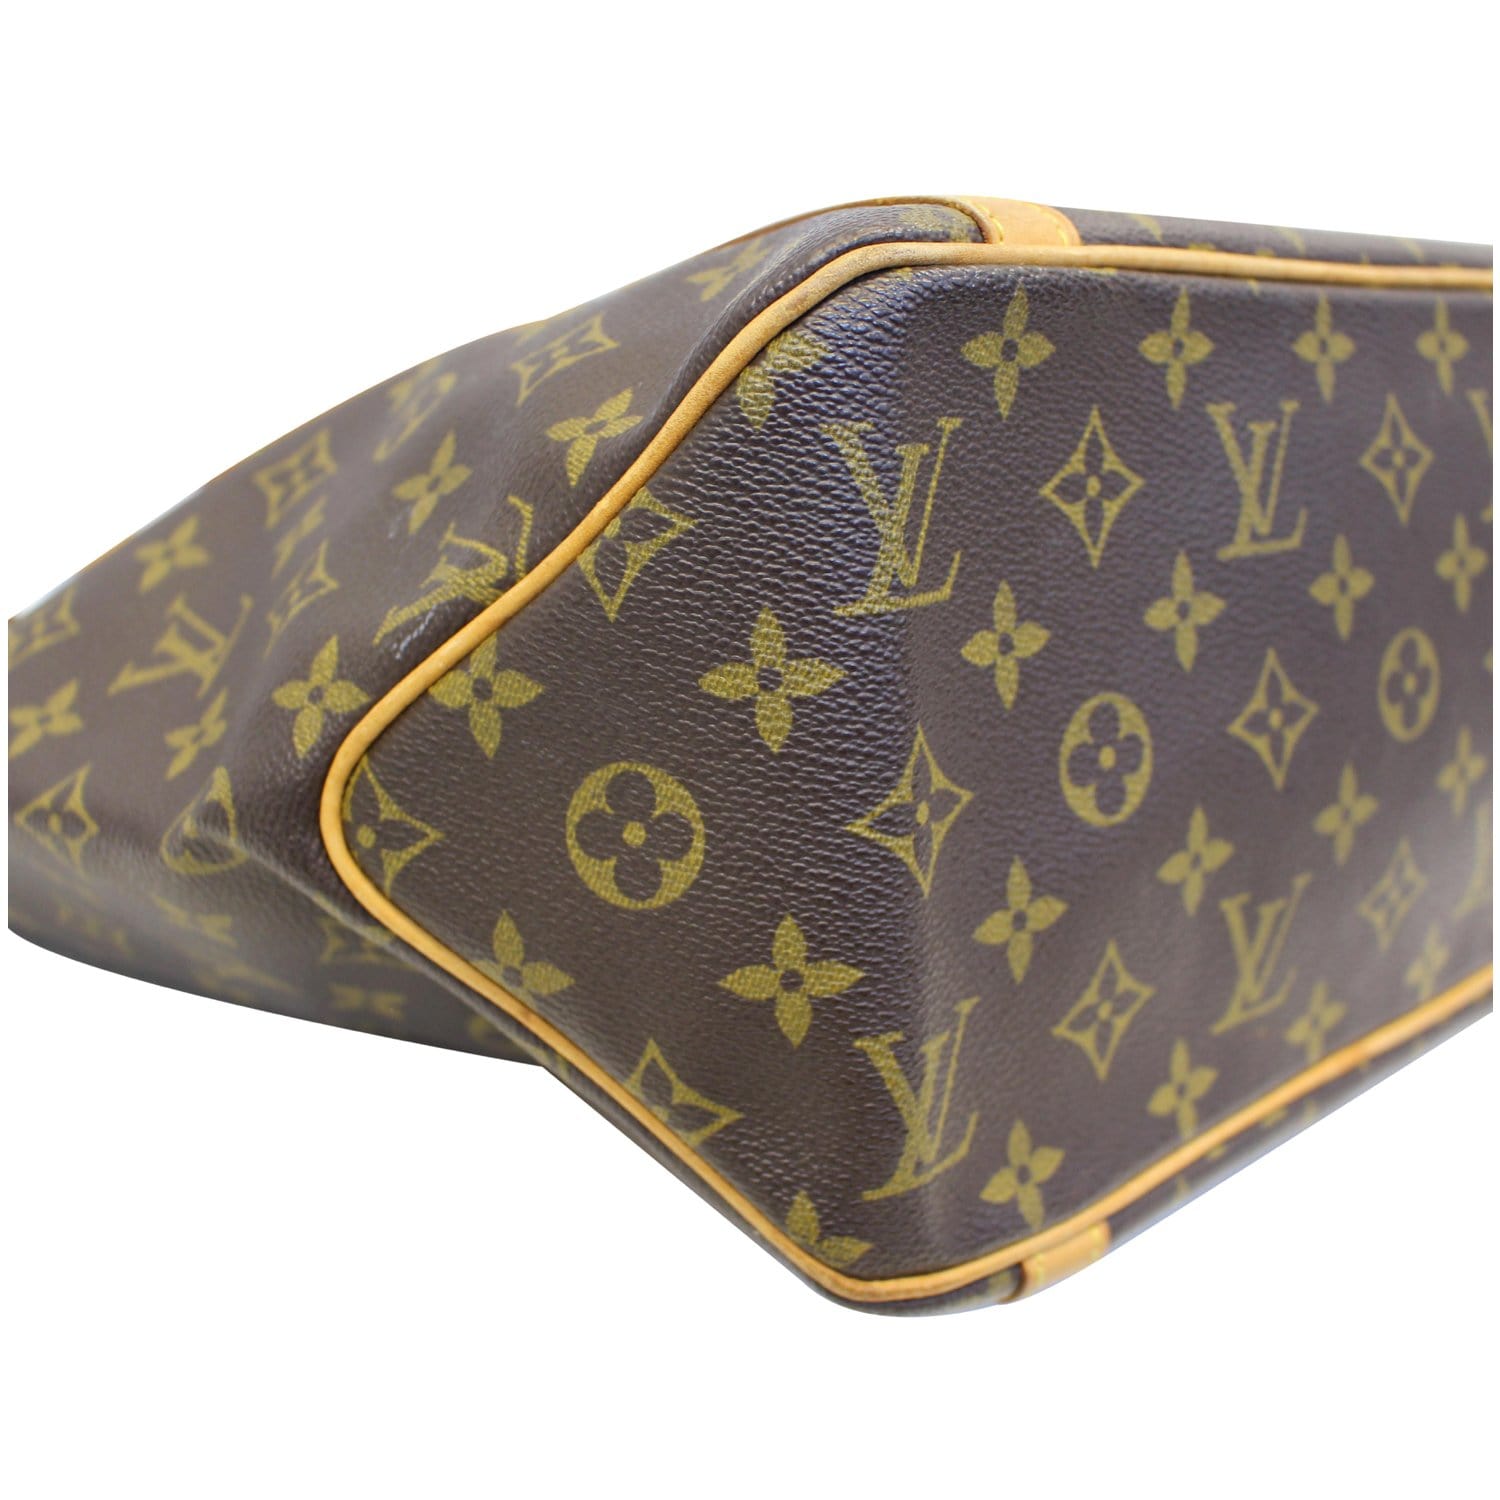 🌞 Why the Louis Vuitton Sac Shopping Tote Is Worth Every Penny #lvmonogram  #louisvuitton #lvbag 